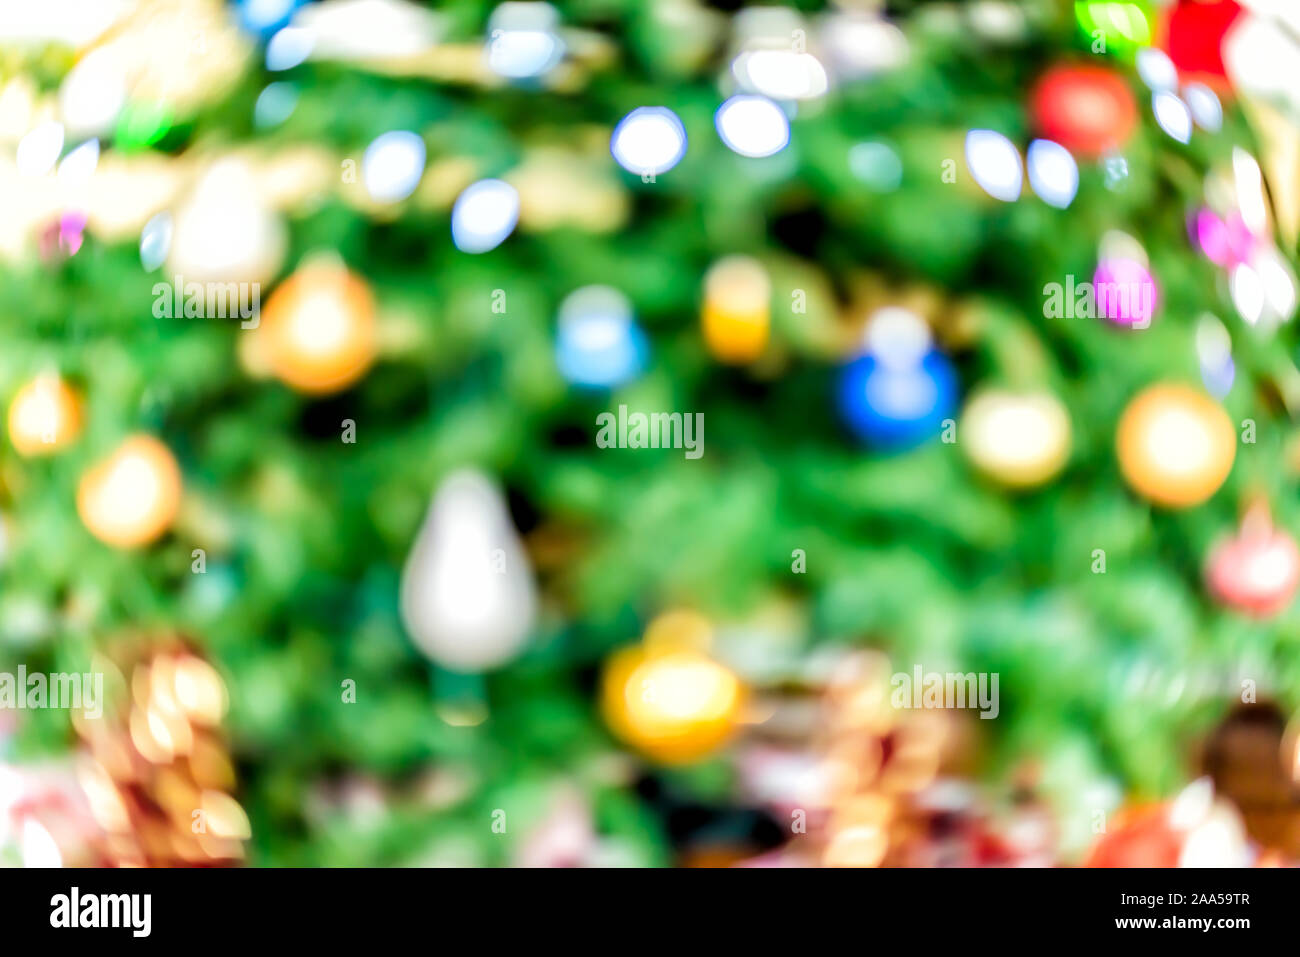 Christmas xmas bokeh abstract background with red, blue and green ornaments decorations on festive tree bright lights Stock Photo